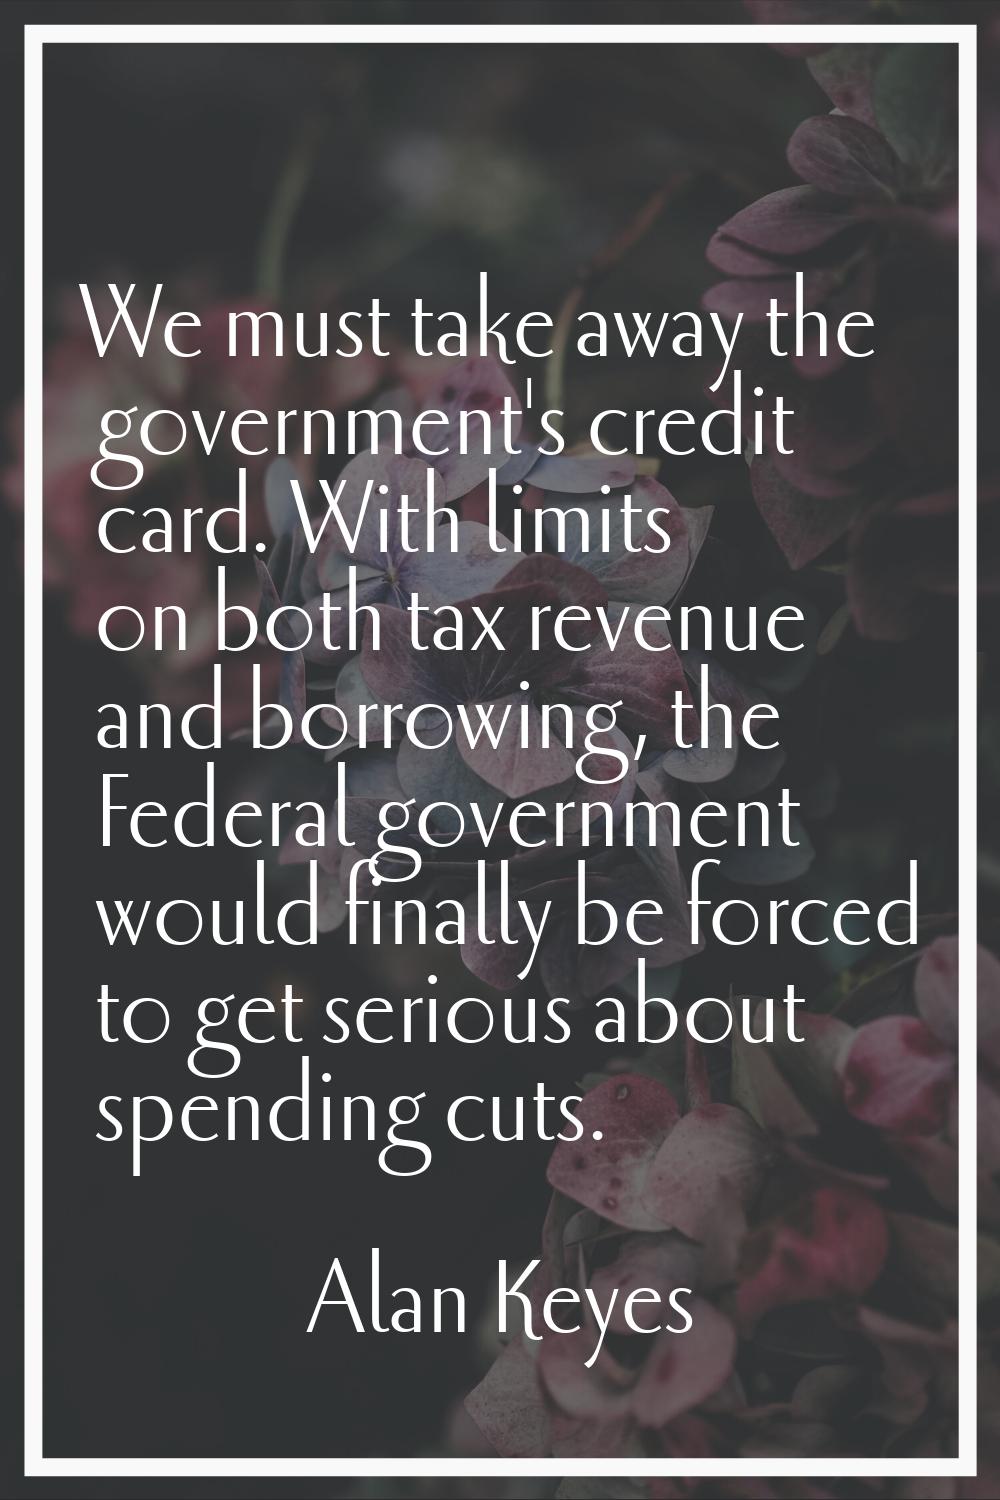 We must take away the government's credit card. With limits on both tax revenue and borrowing, the 